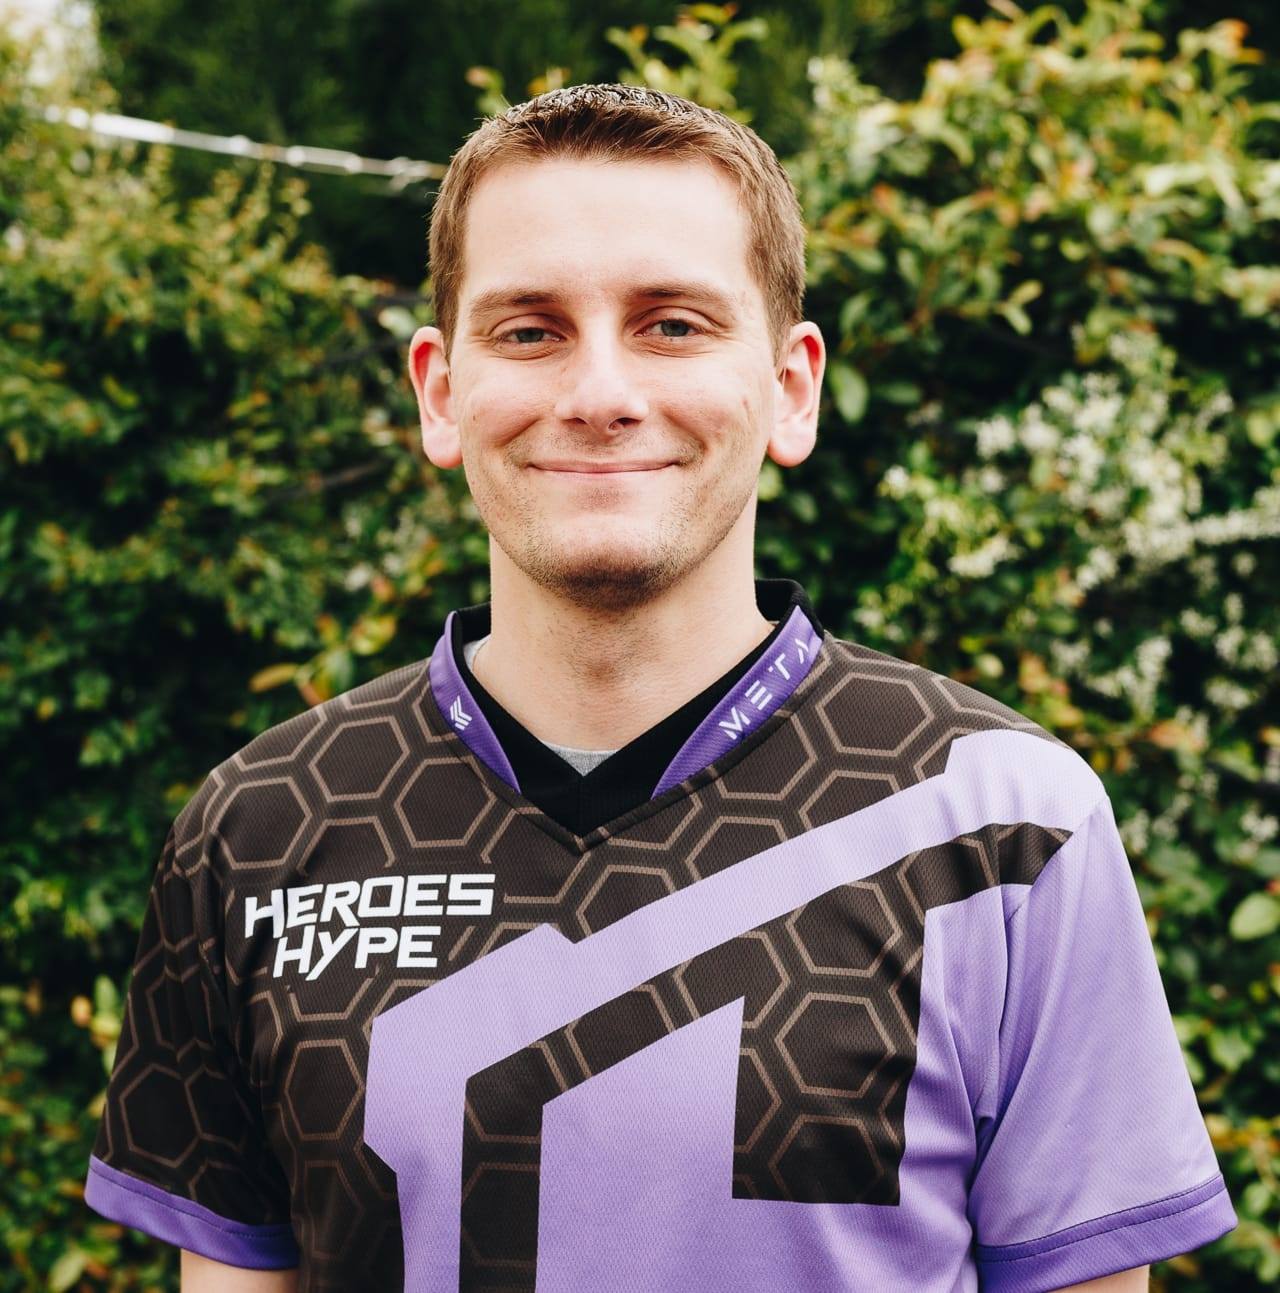 Image of Aaron Blackman, director of esports and head coach. He wears a black and purple jersey that reads "Heroes Hype," and stands in front of out-of-focus shrubs and bushes. His light brown hair is cut short and gelled up at the front. 